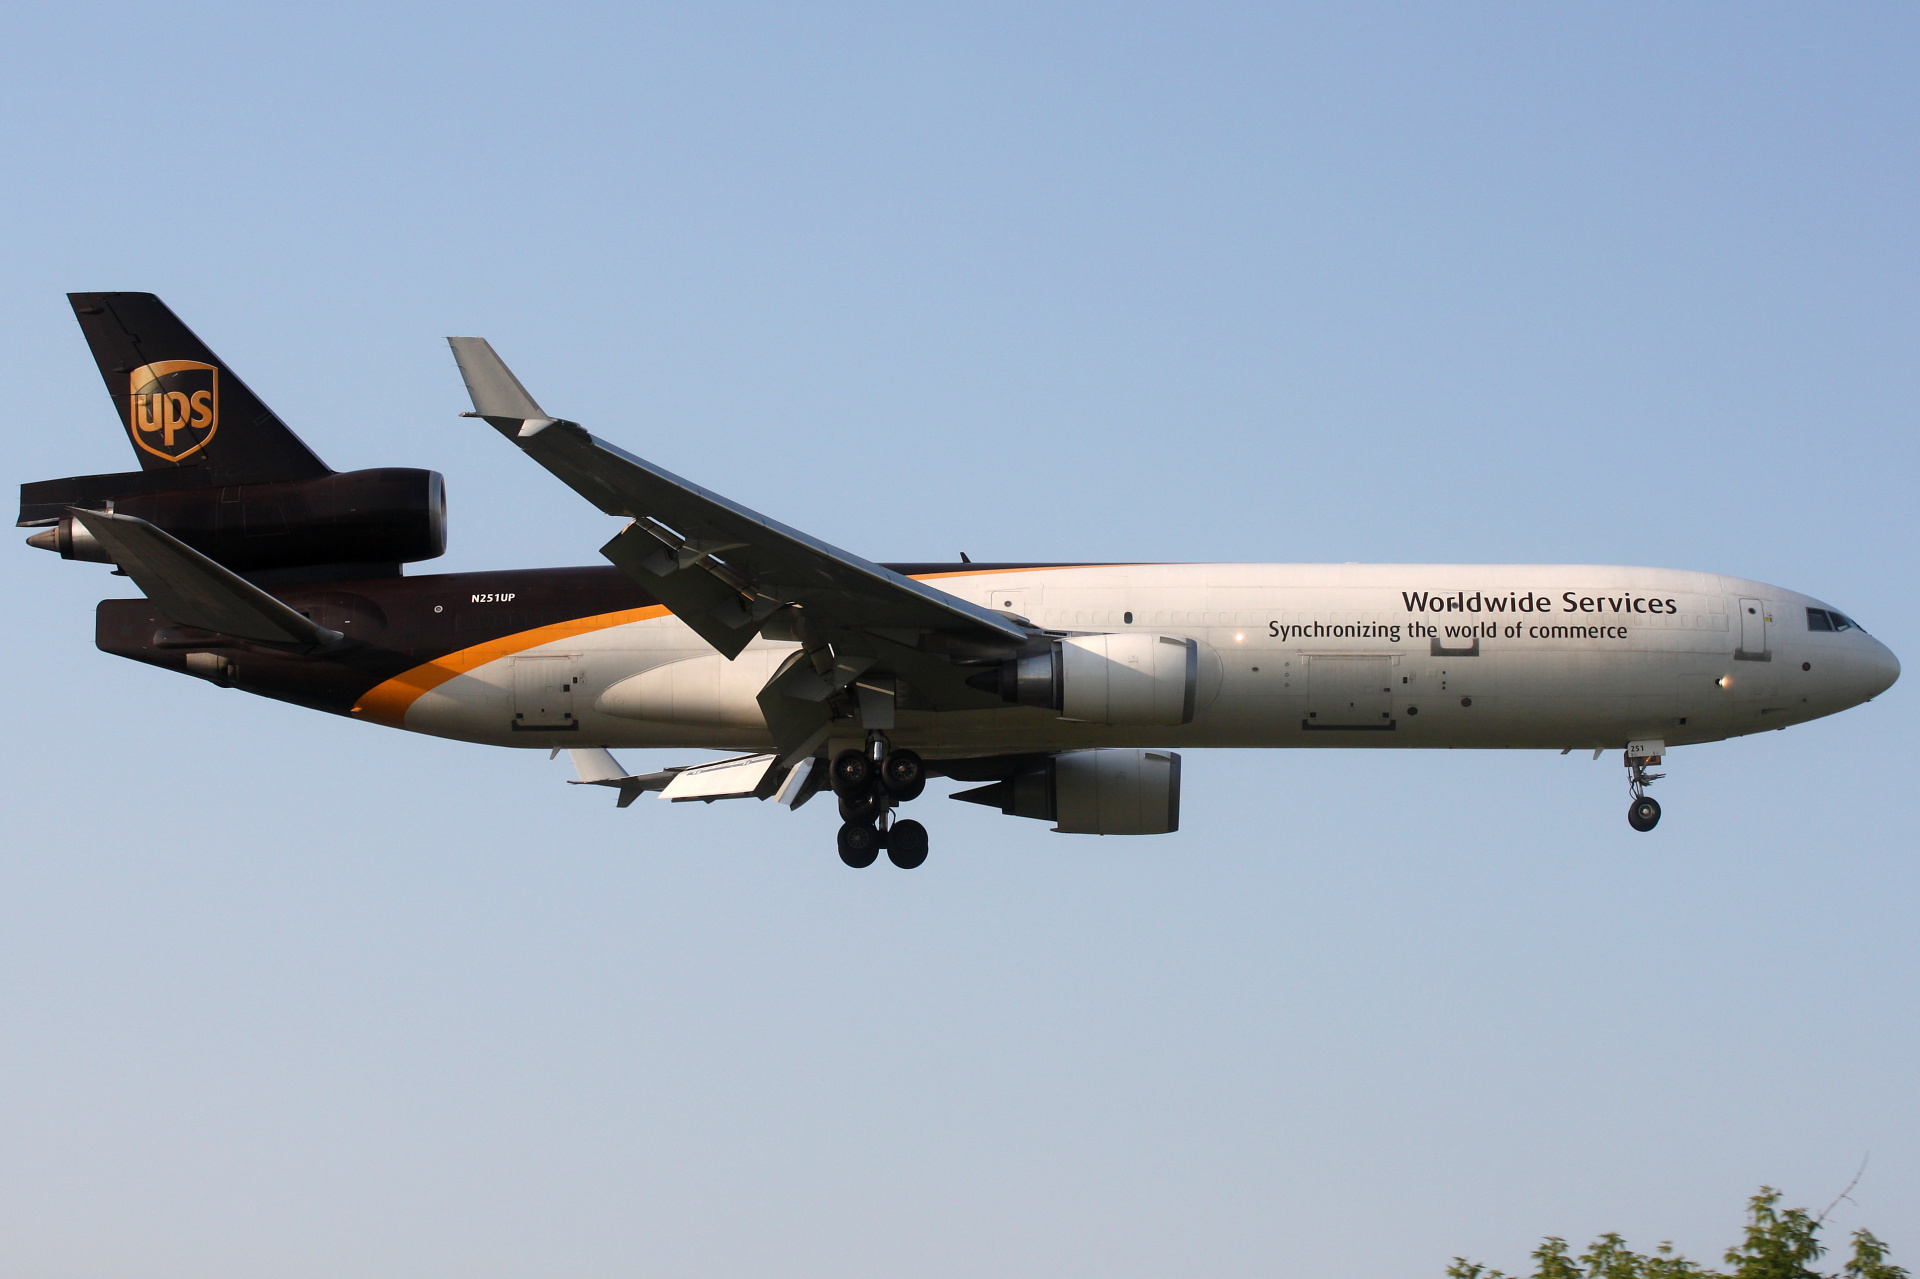 N251UP, United Parcel Service (UPS) Airlines (Aircraft » EPWA Spotting » McDonnell Douglas MD-11F)